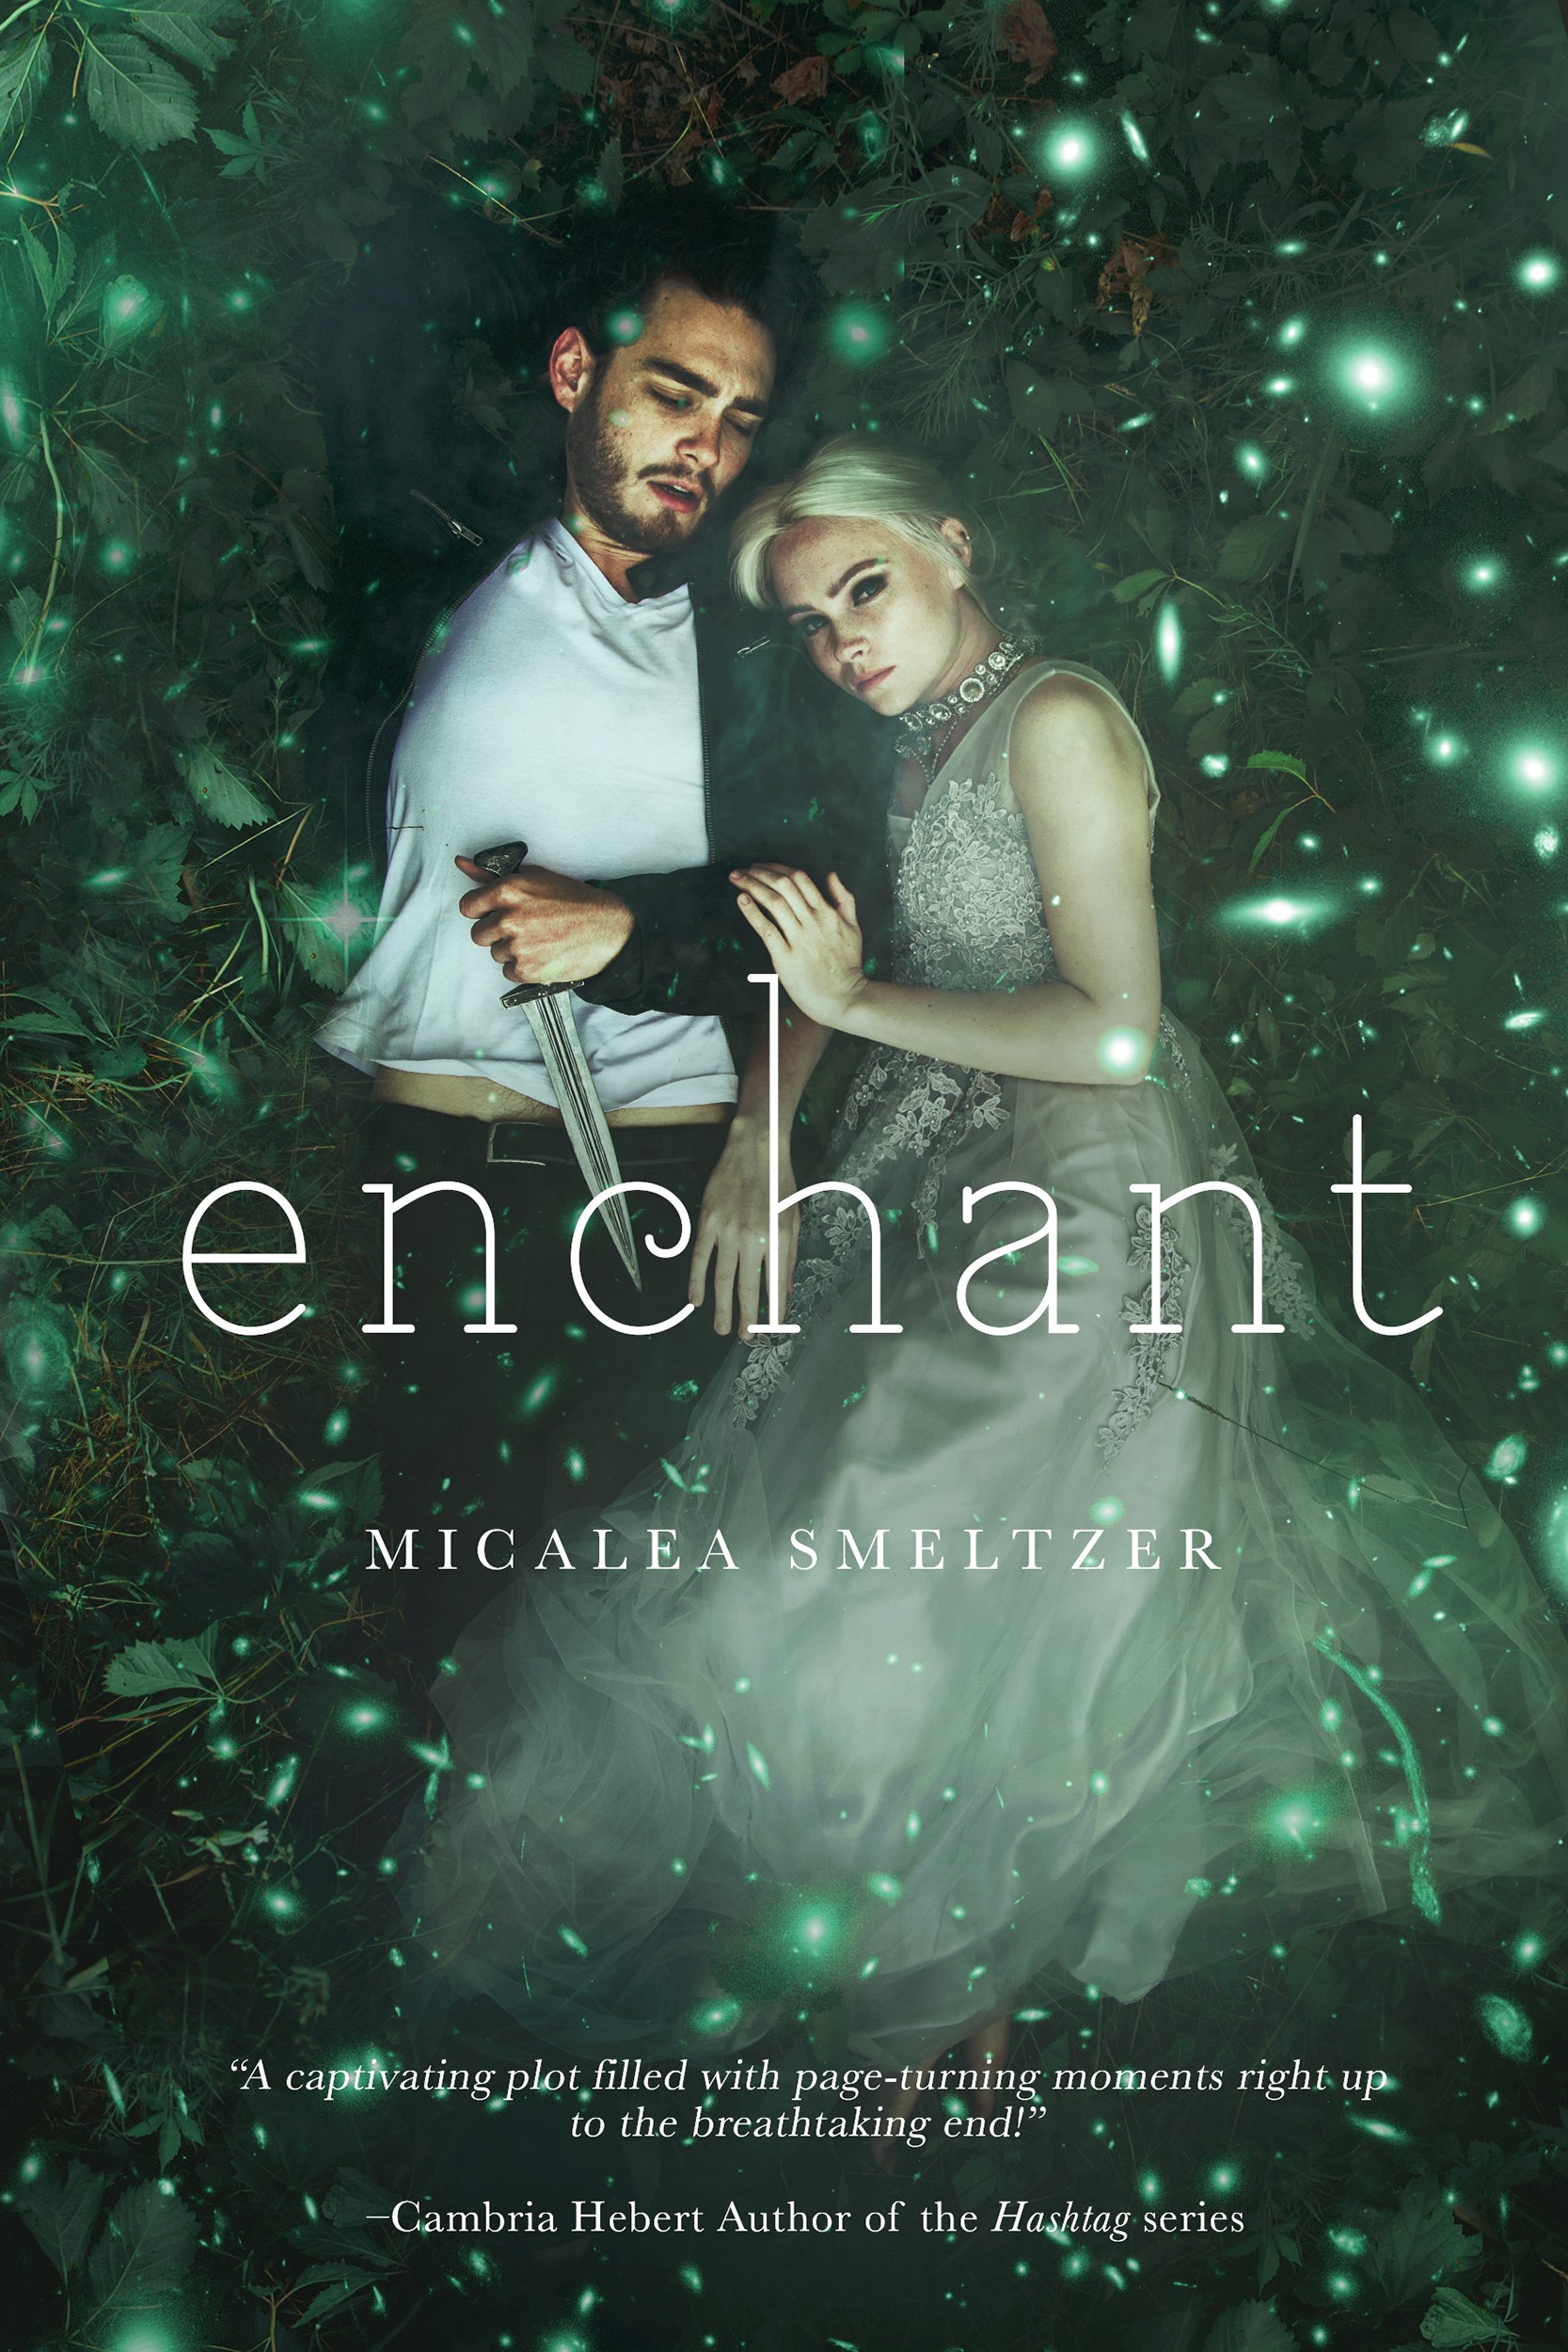 Interview and Release Day for Enchant by Micalea Smeltzer